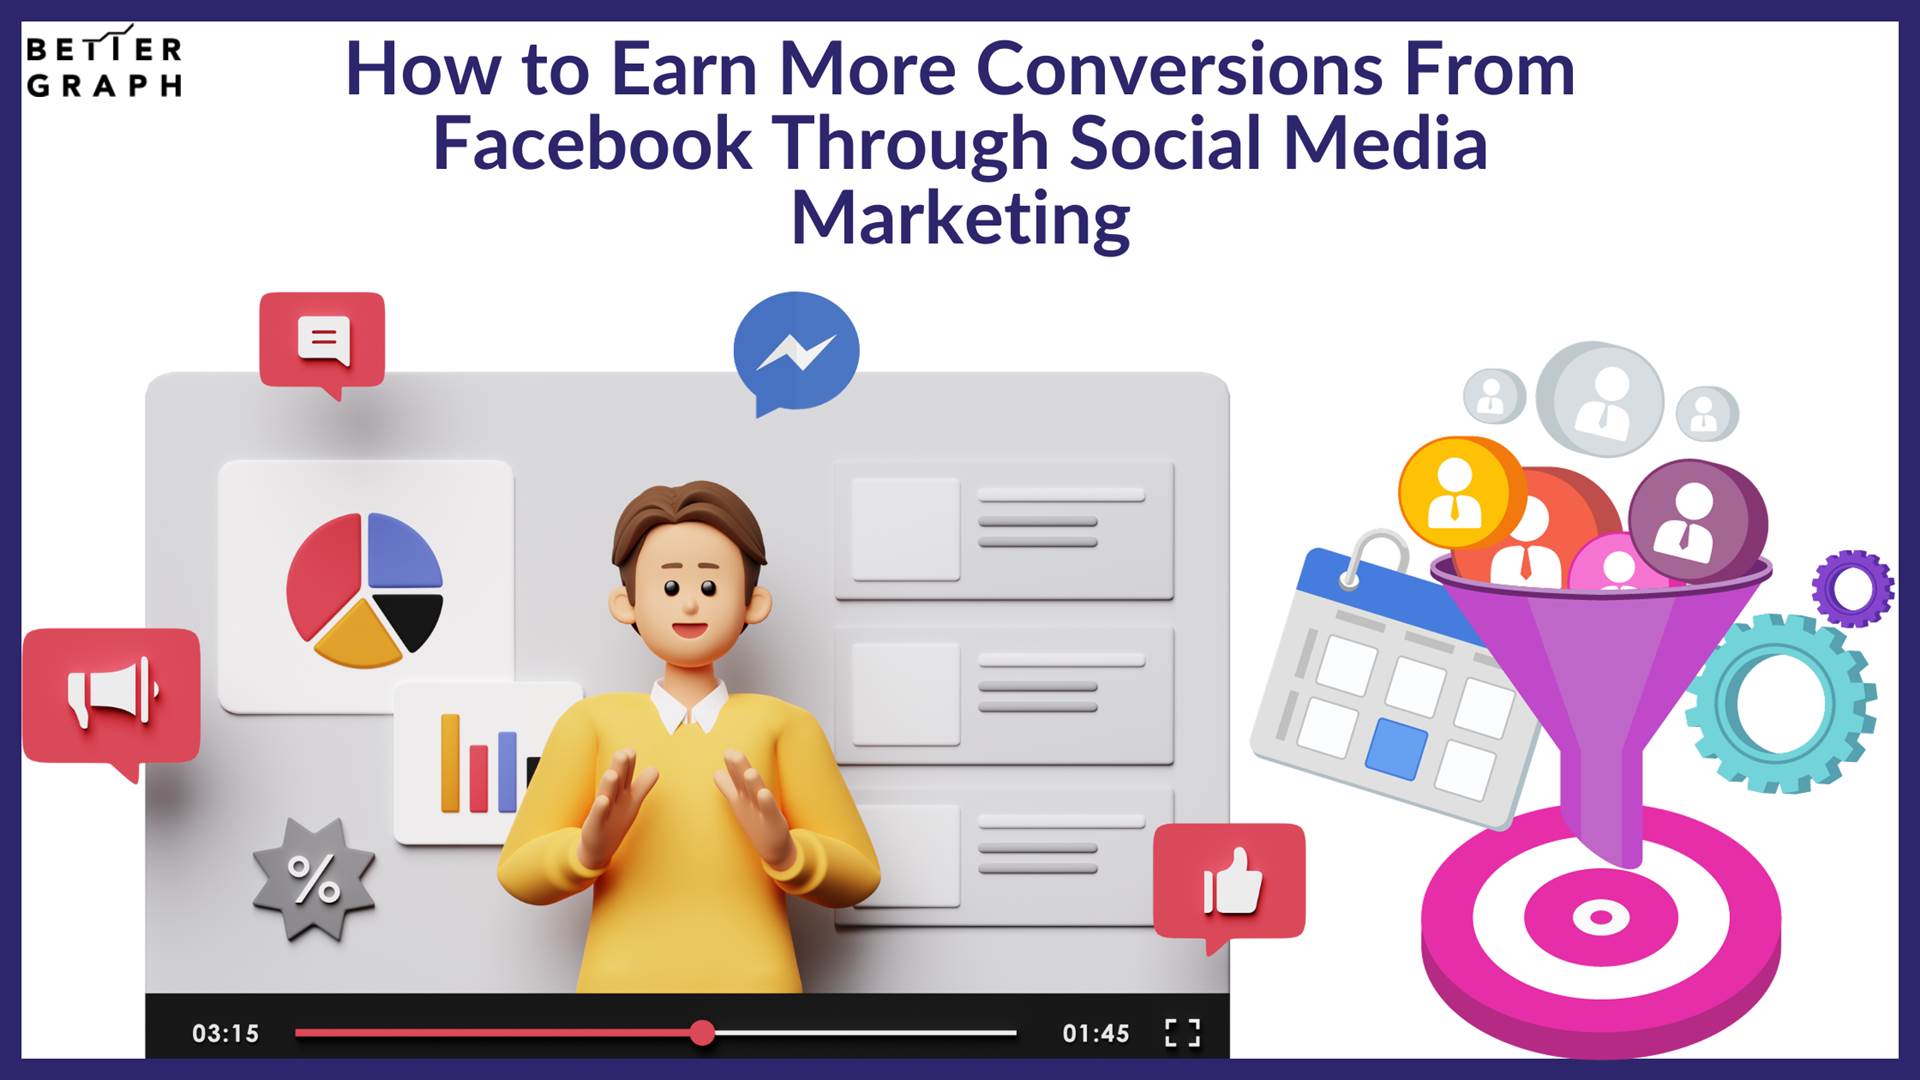 How to Earn More Conversions From Facebook Through Social Media Marketing (1).png  by BetterGraph